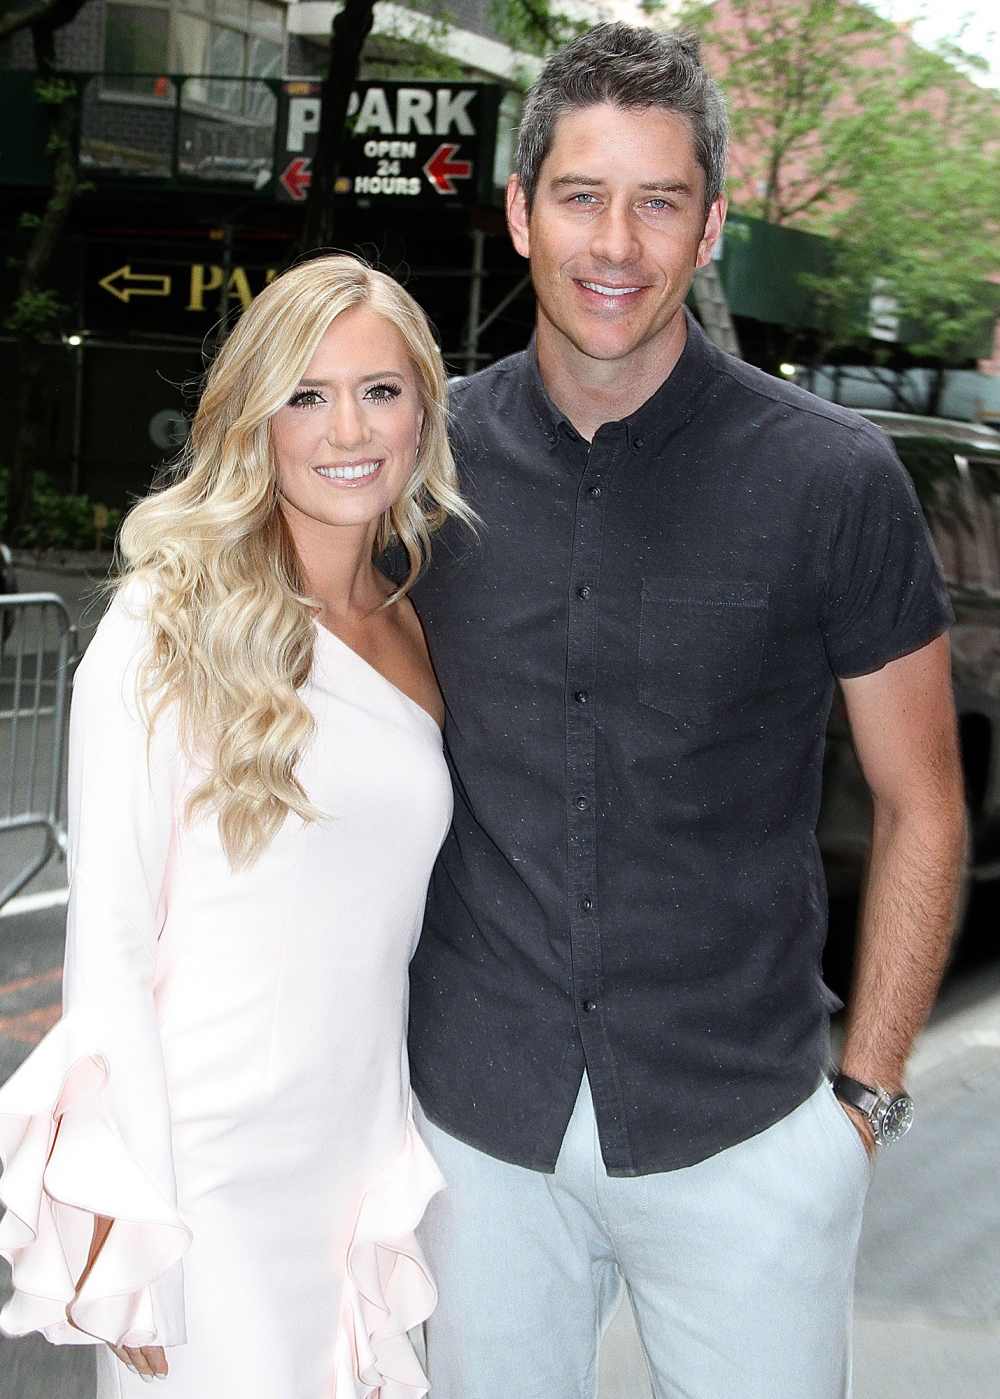 Pregnant Lauren Burnham: Arie Luyendyk Jr. Got 'Worn Out' By Sex 'Pressure' While Trying to Conceive